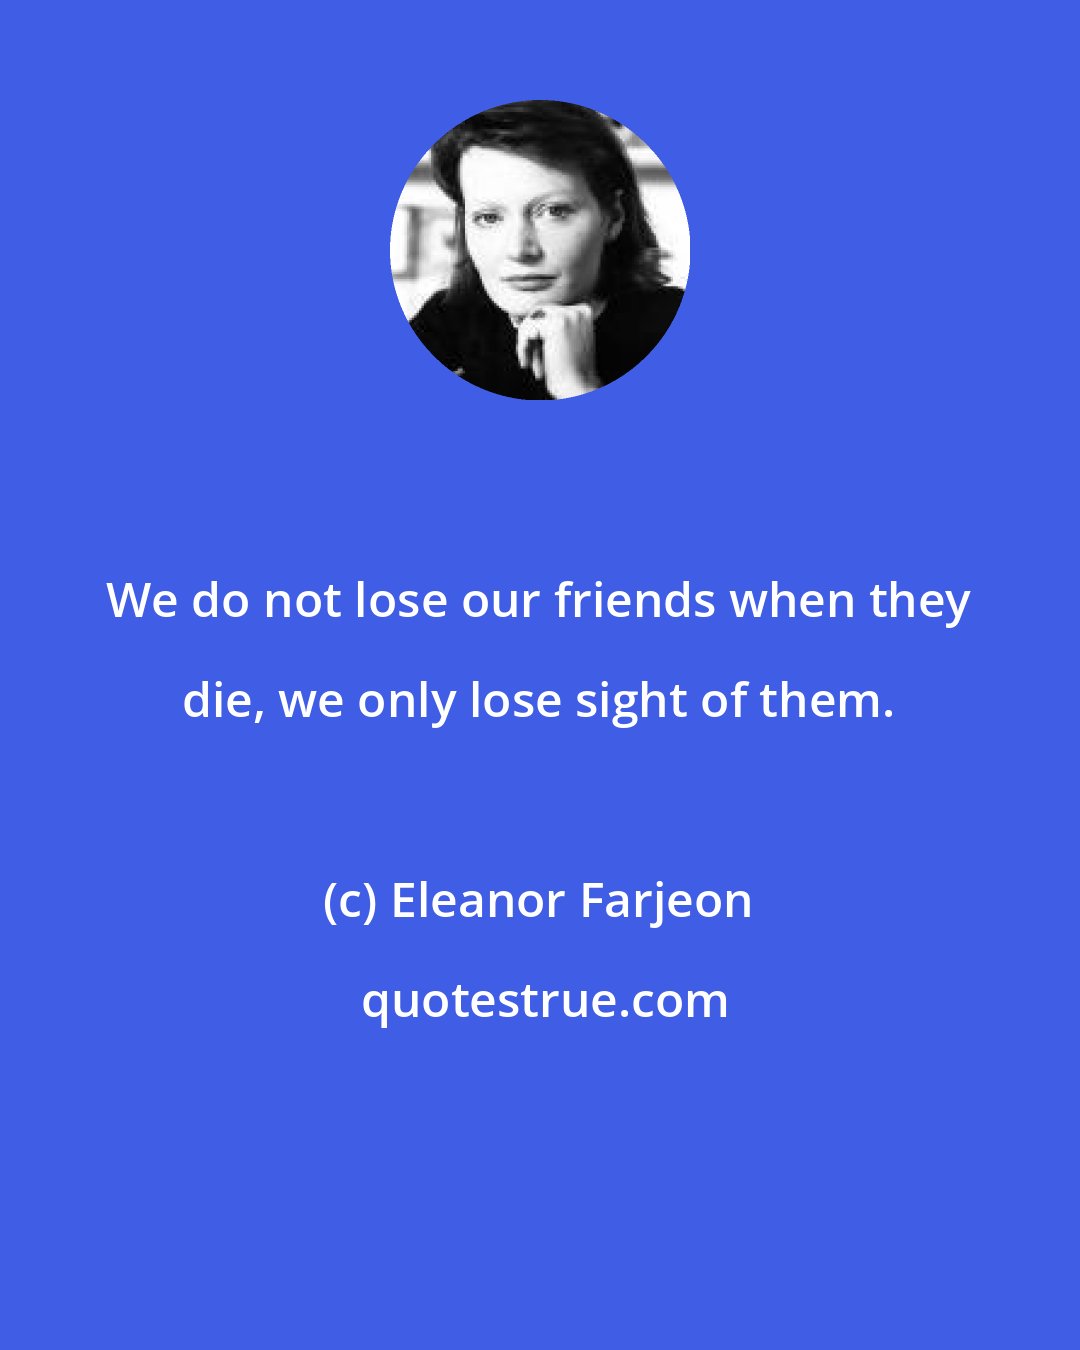 Eleanor Farjeon: We do not lose our friends when they die, we only lose sight of them.